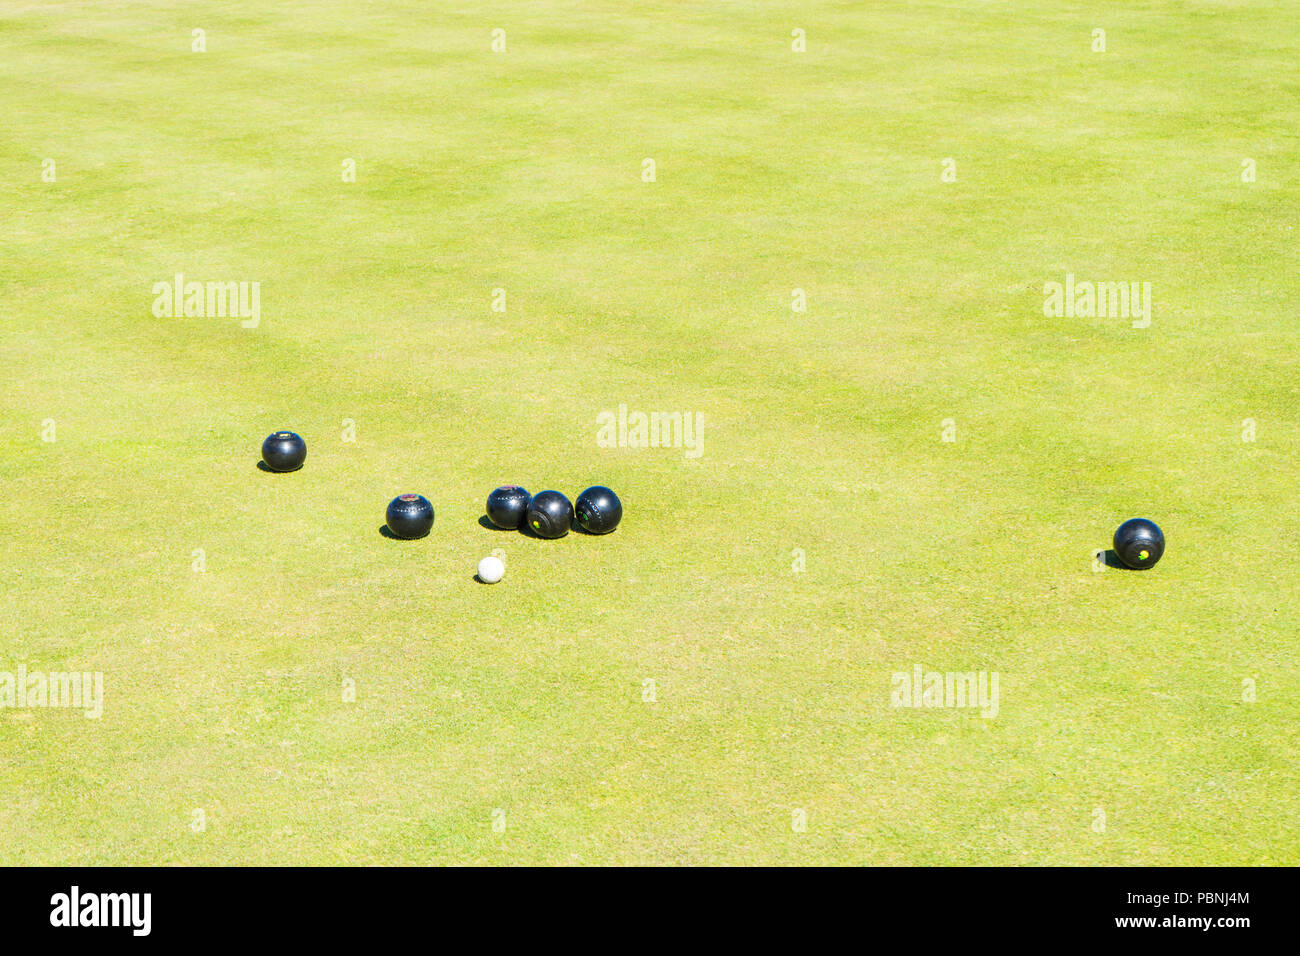 Men playing bowls at the bowling club  Greate Yarmouth, England. Bowls Tournaments in Greater Yarmouth.The bowling green. Stock Photo